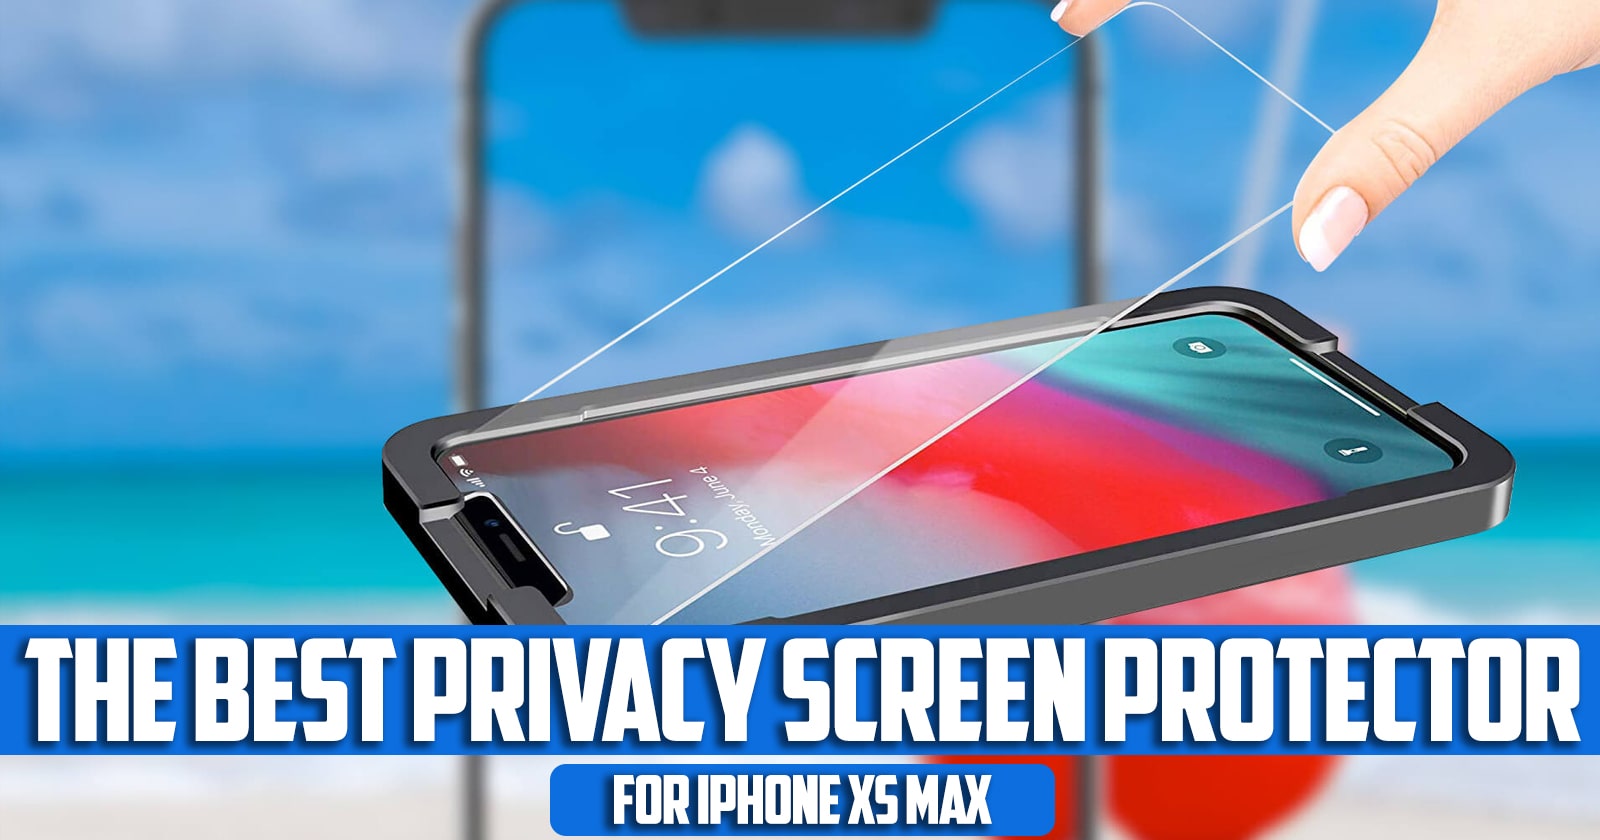 The Best Privacy Screen Protector for iPhone XS Max